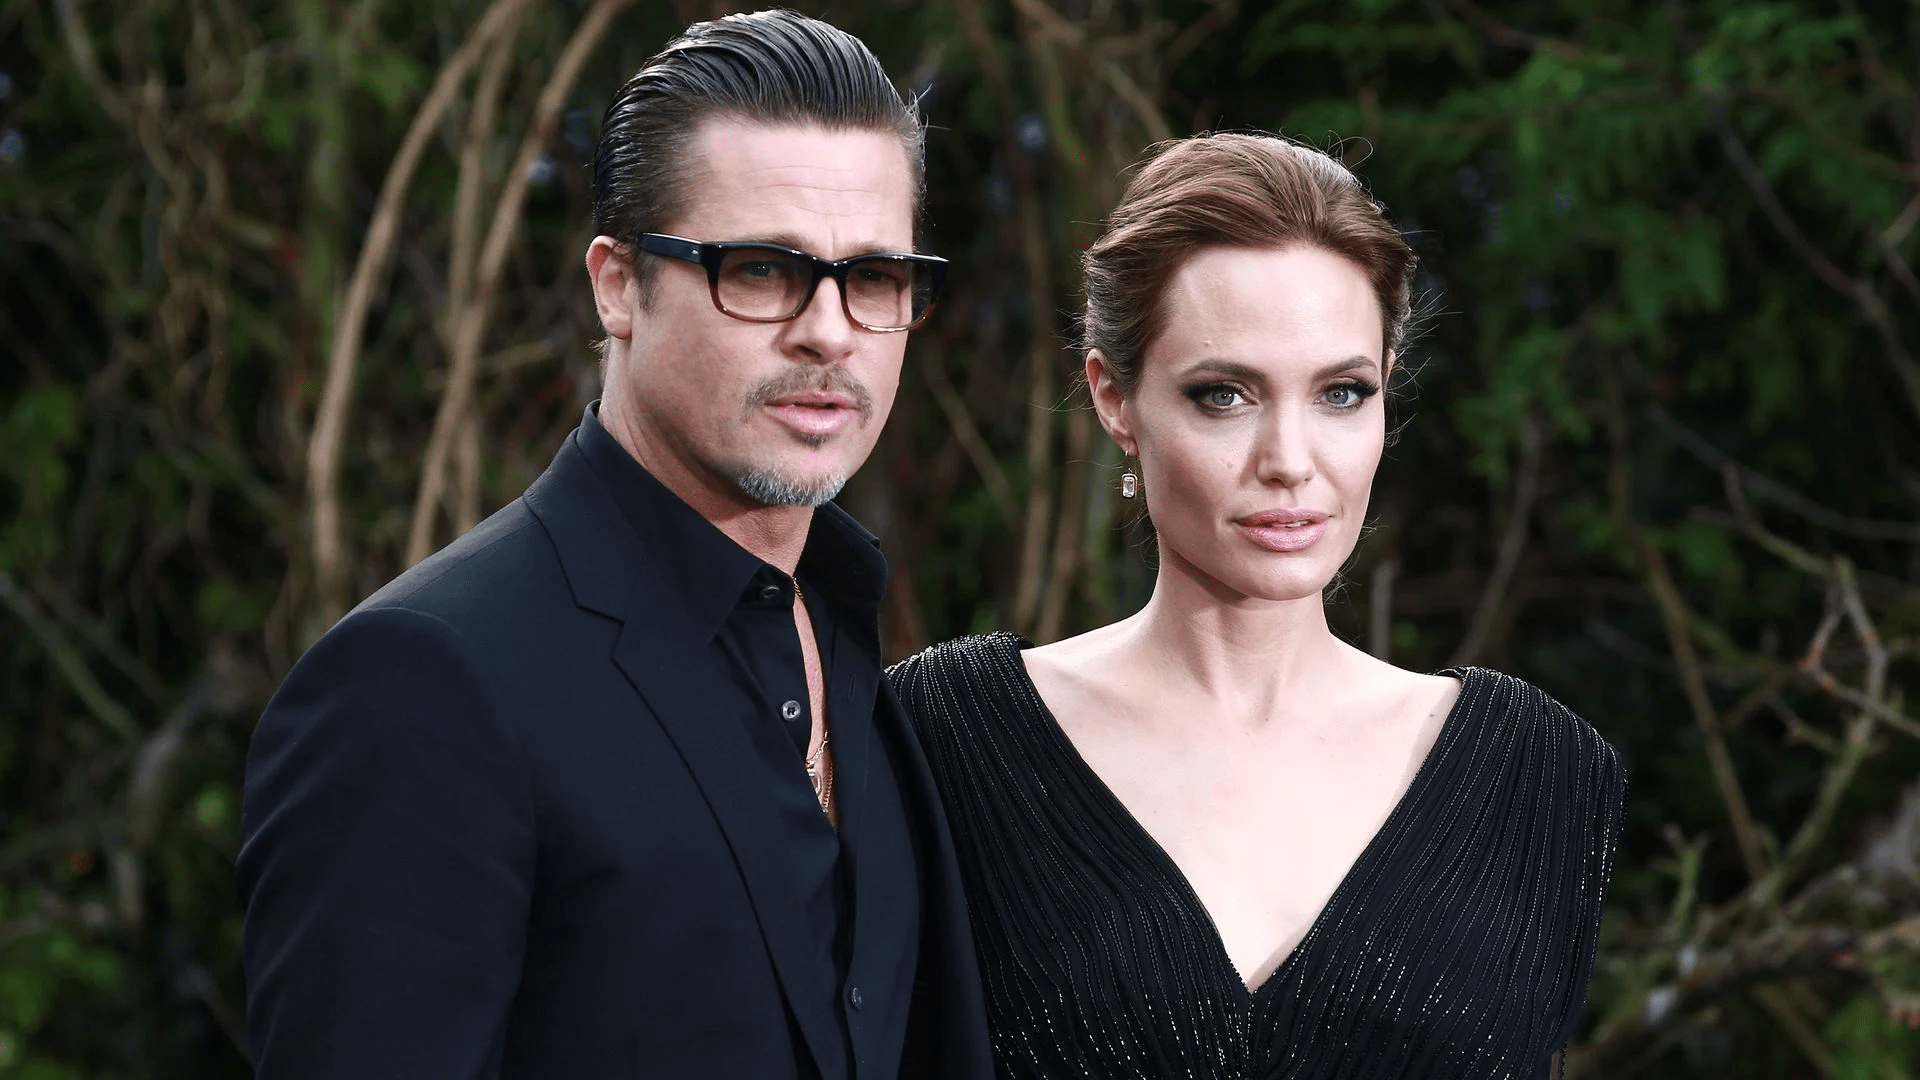 Angelina Jolie Says She ‘Wouldn’t Be an Actress Today’ and Plans to Leave Los Angeles